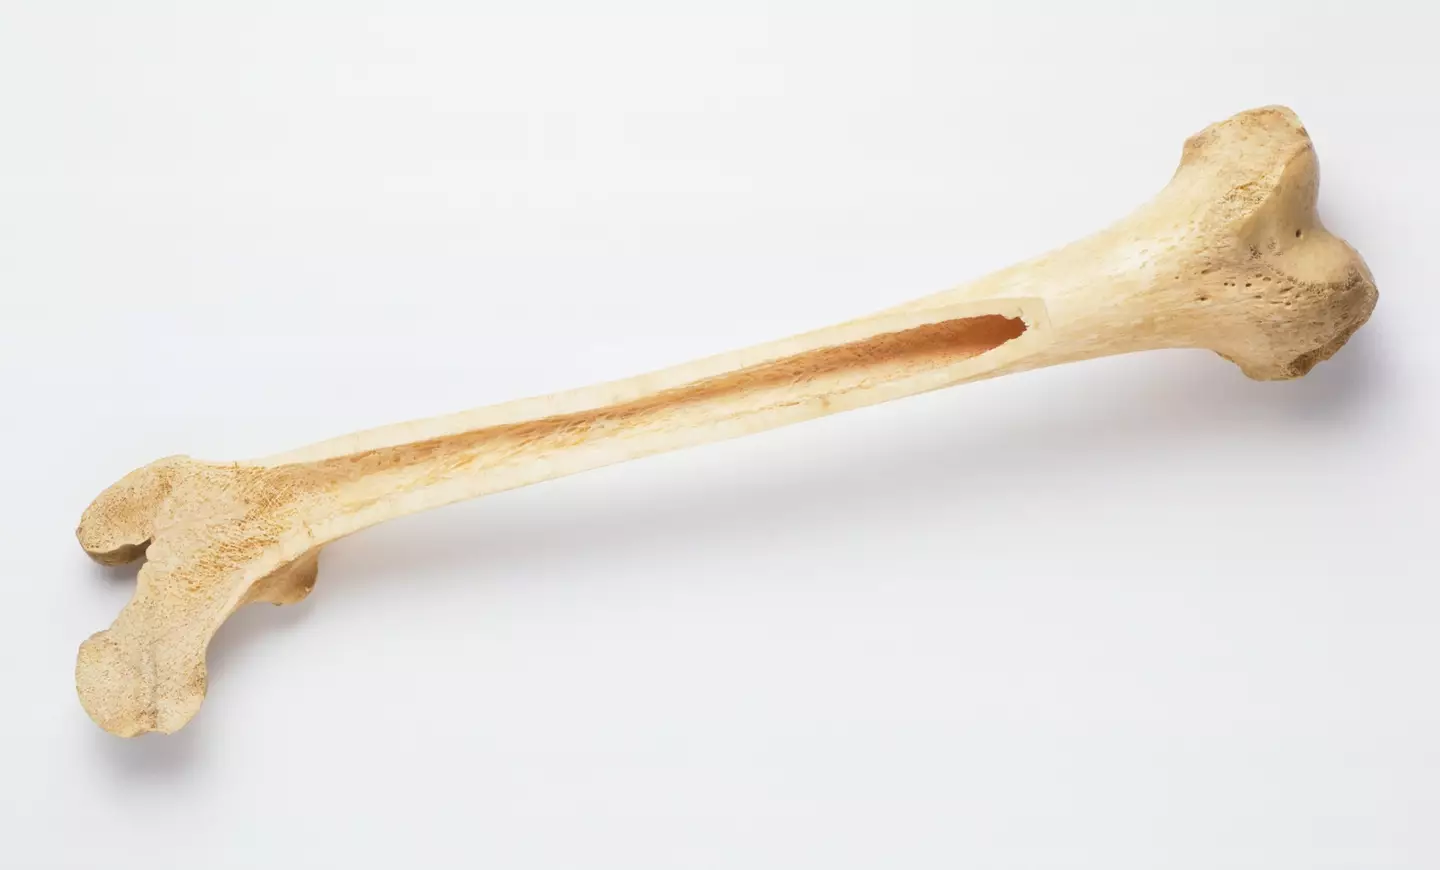 There was also a human thigh bone - again, not this one - up for auction.